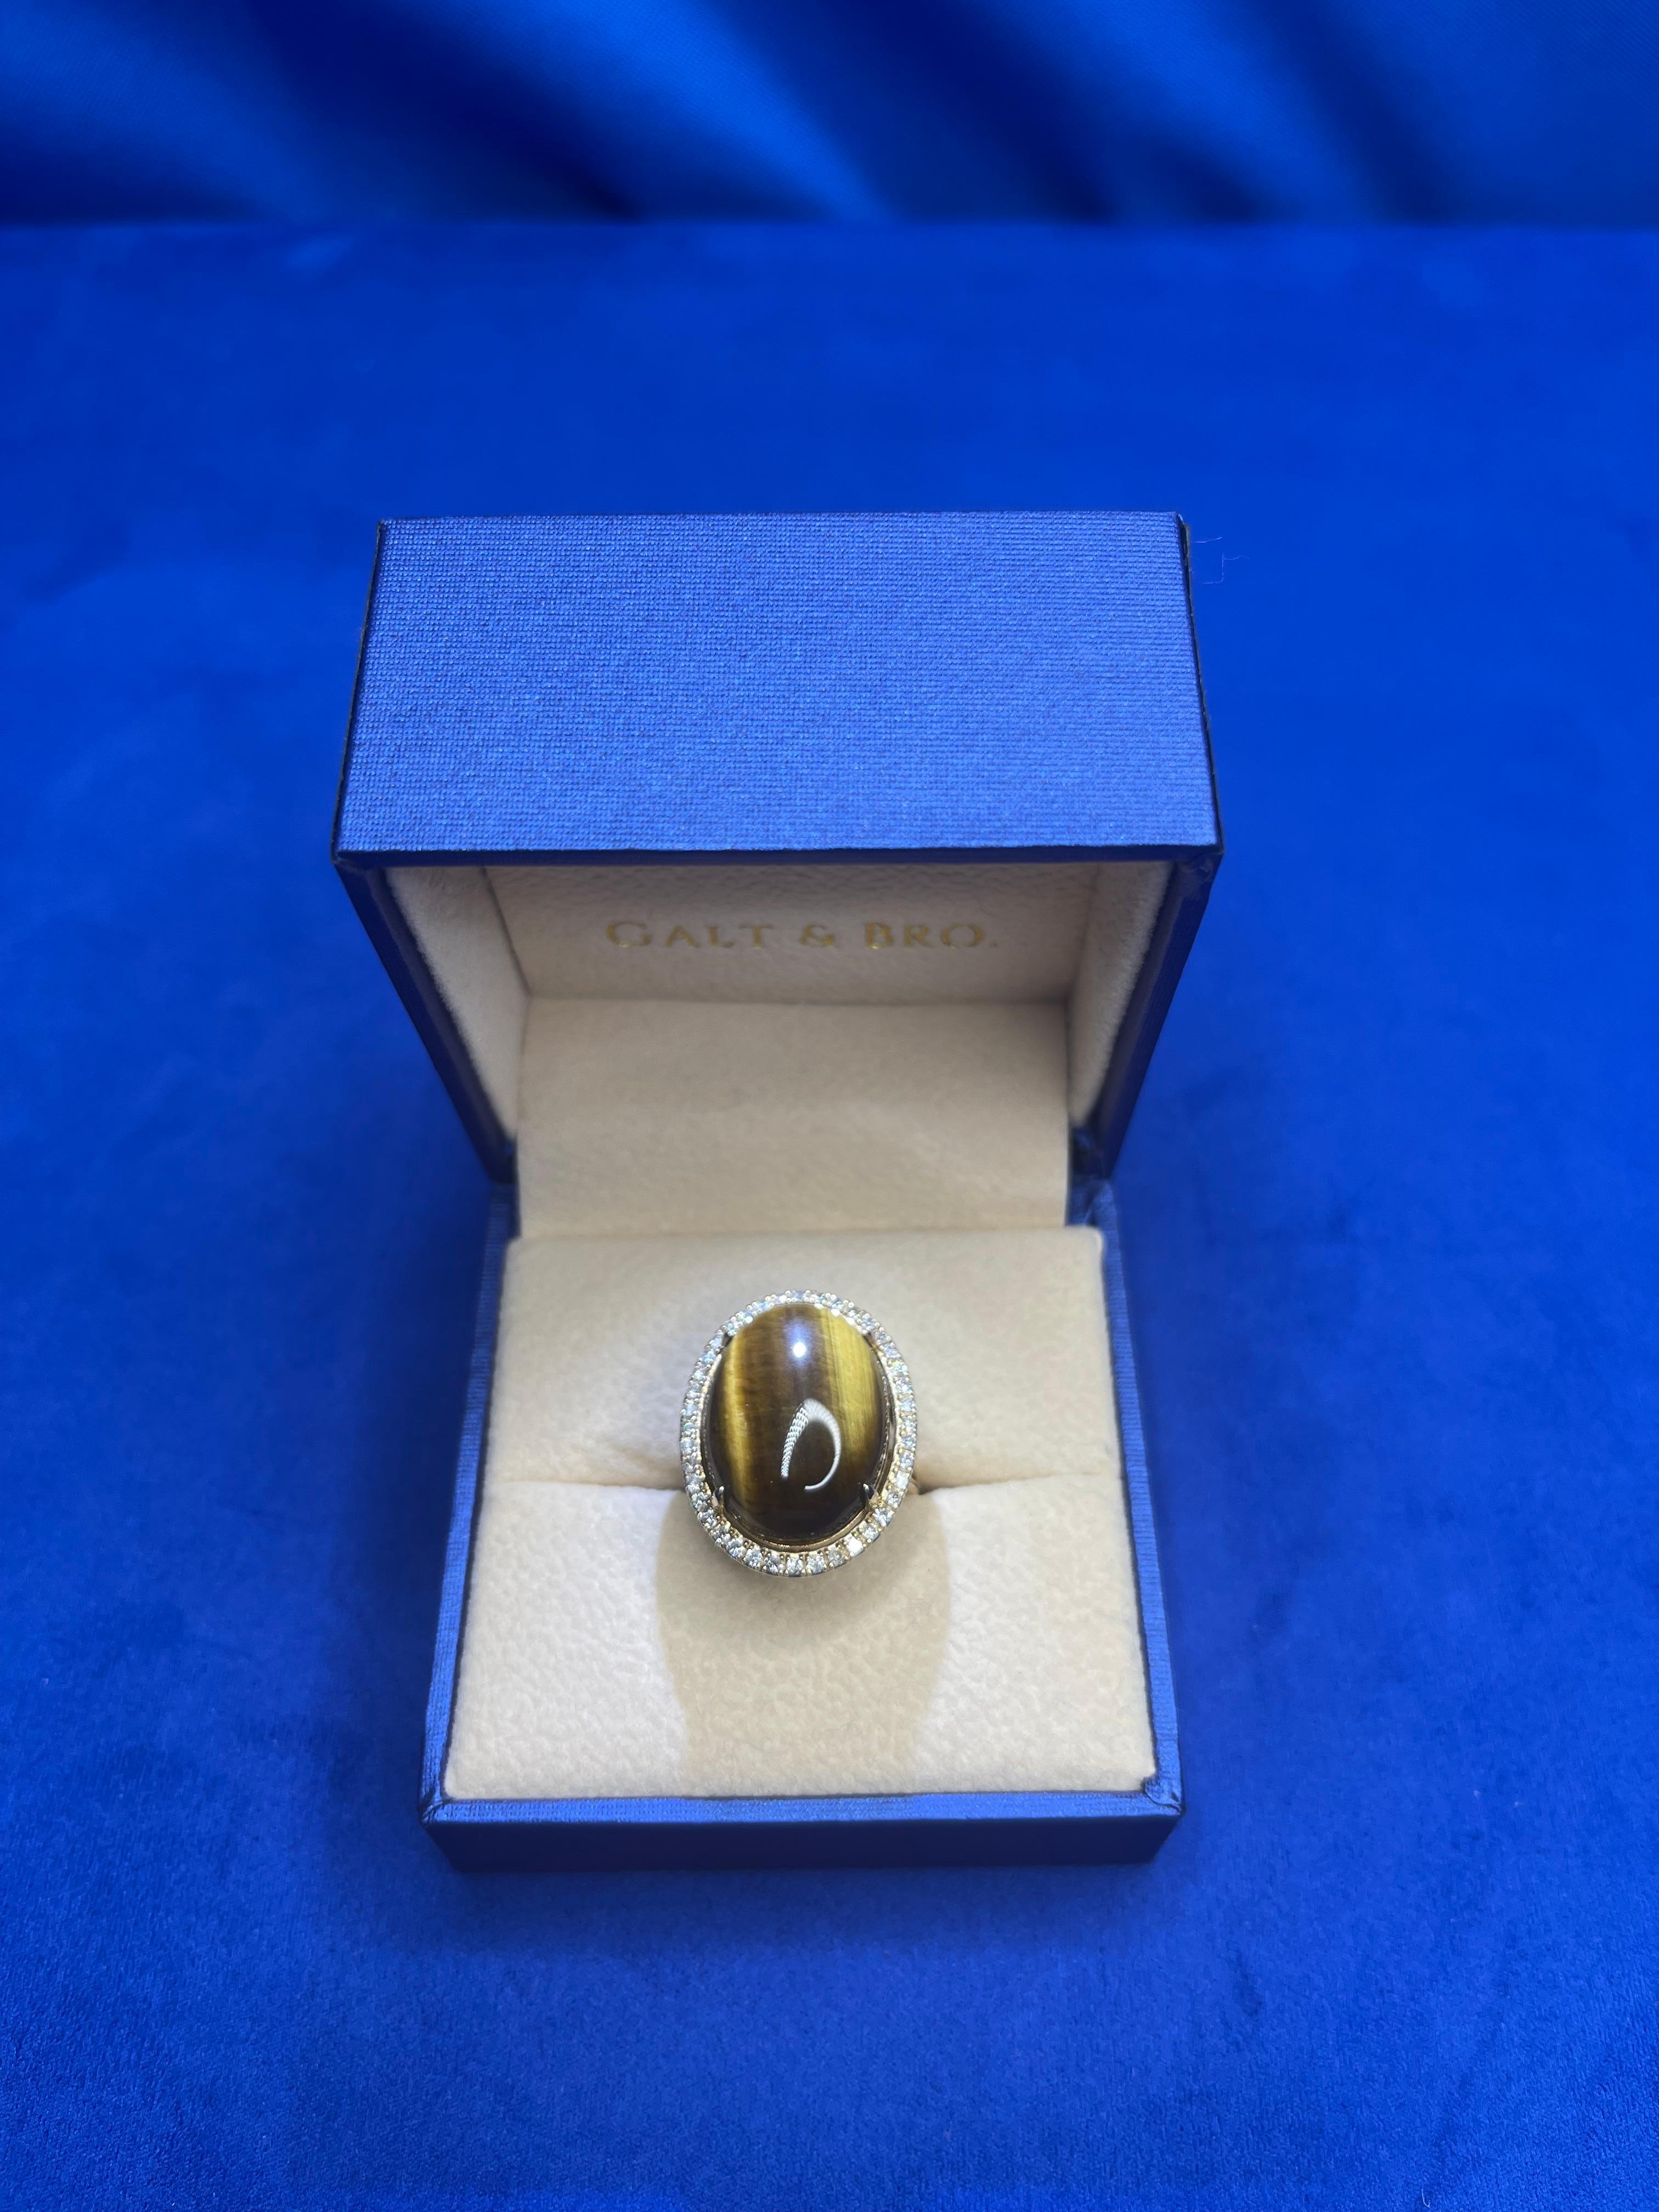 Golden Oval Tiger's Eye Cabochon Diamond Halo Cocktail 14 Karat Yellow Gold Ring For Sale 4